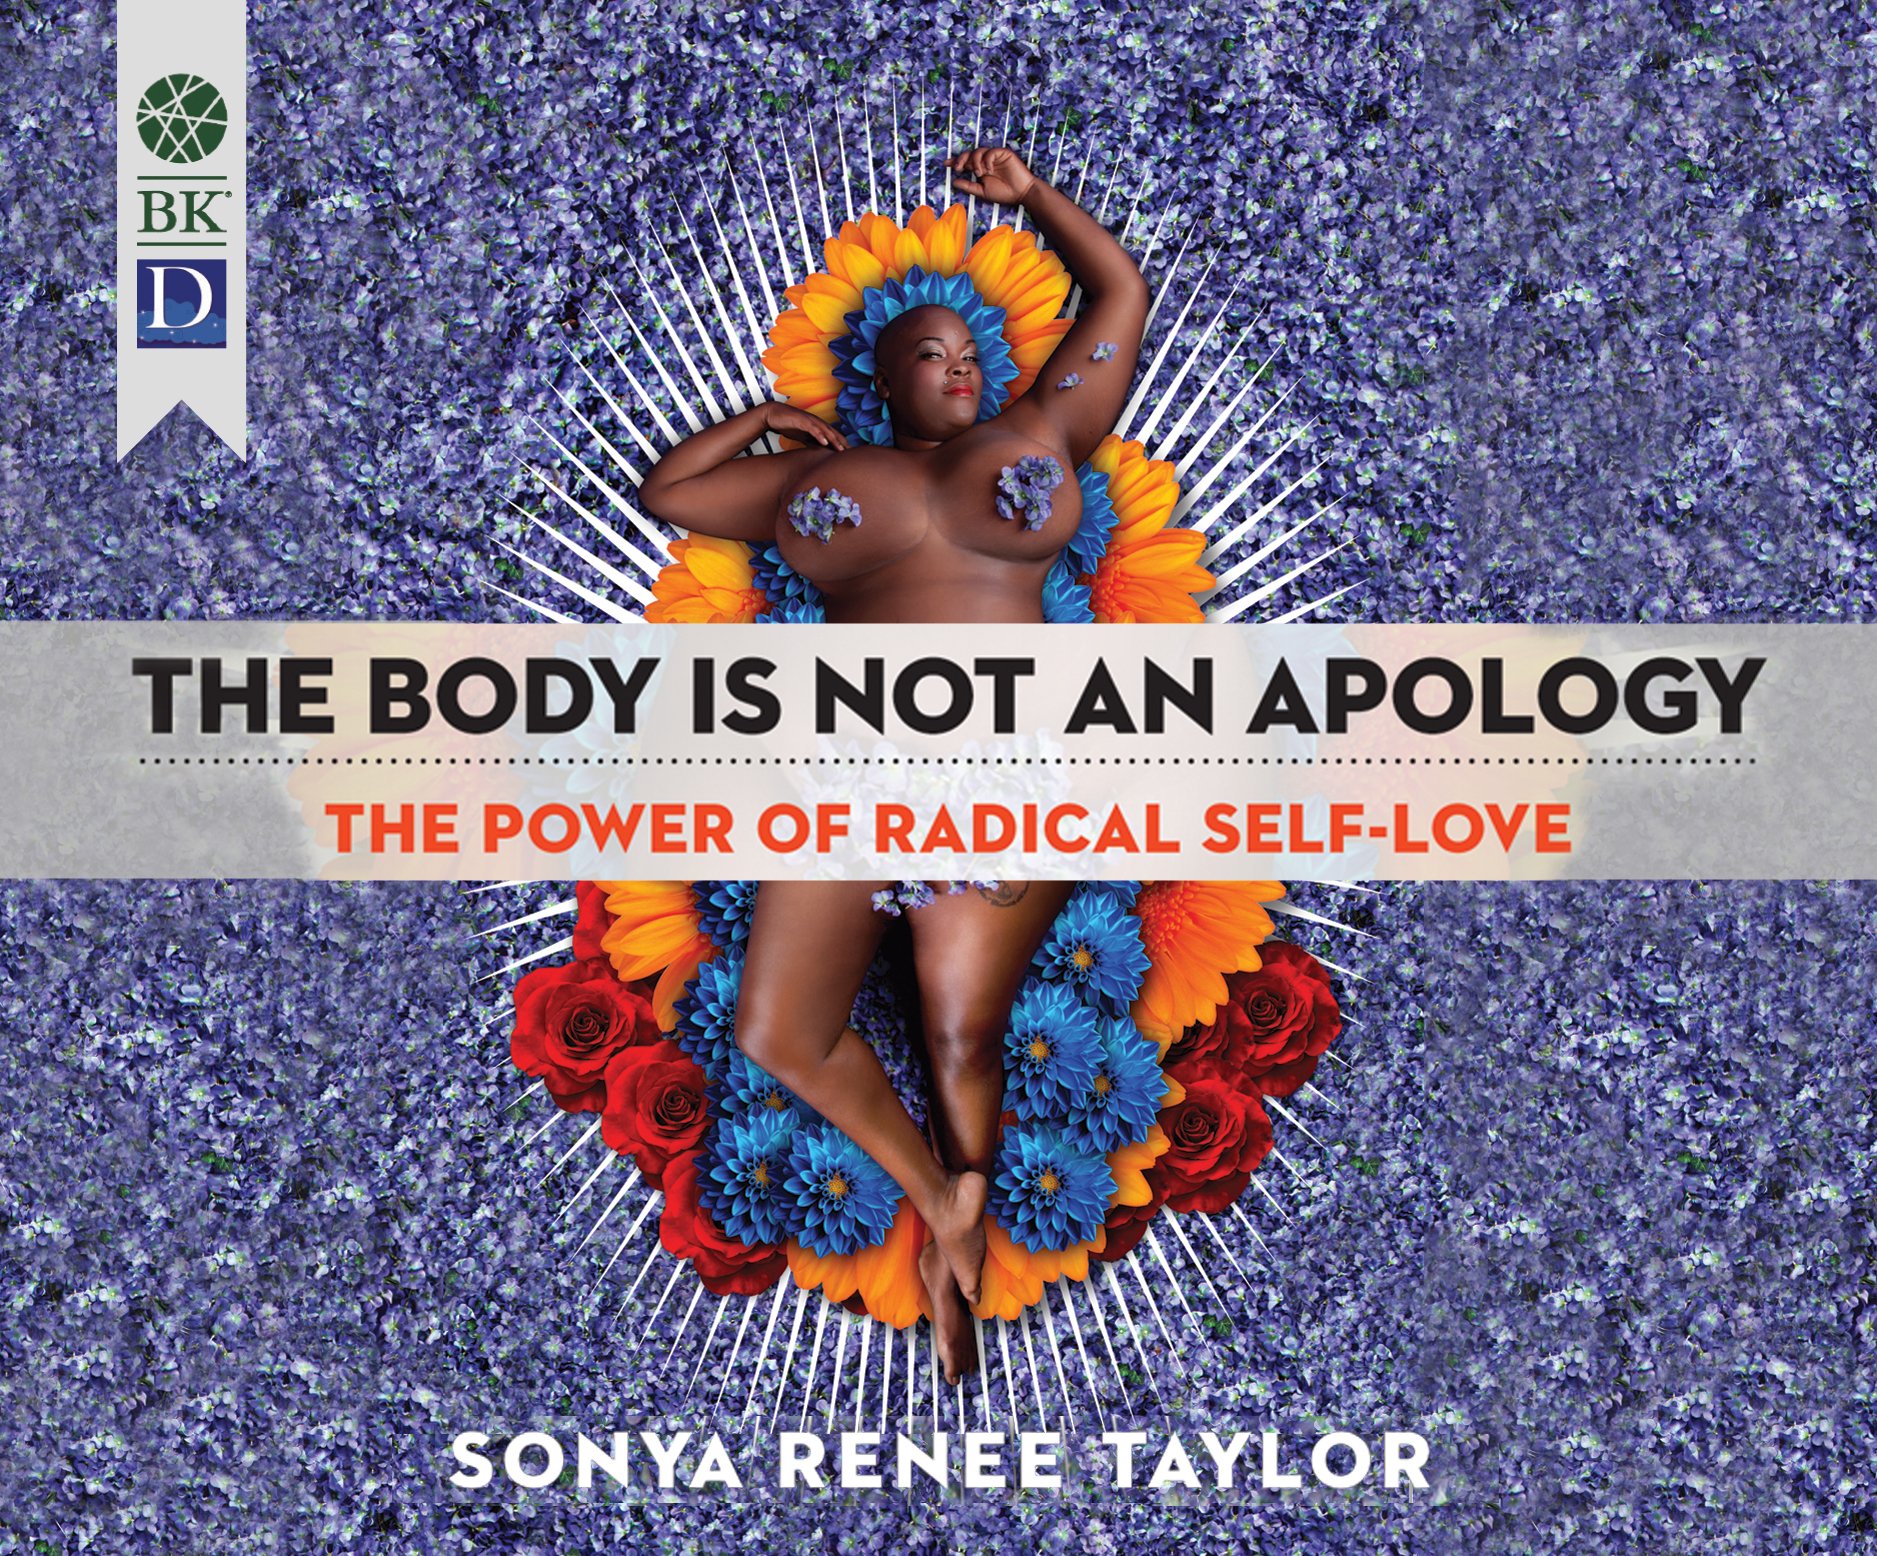 The body is not an apology